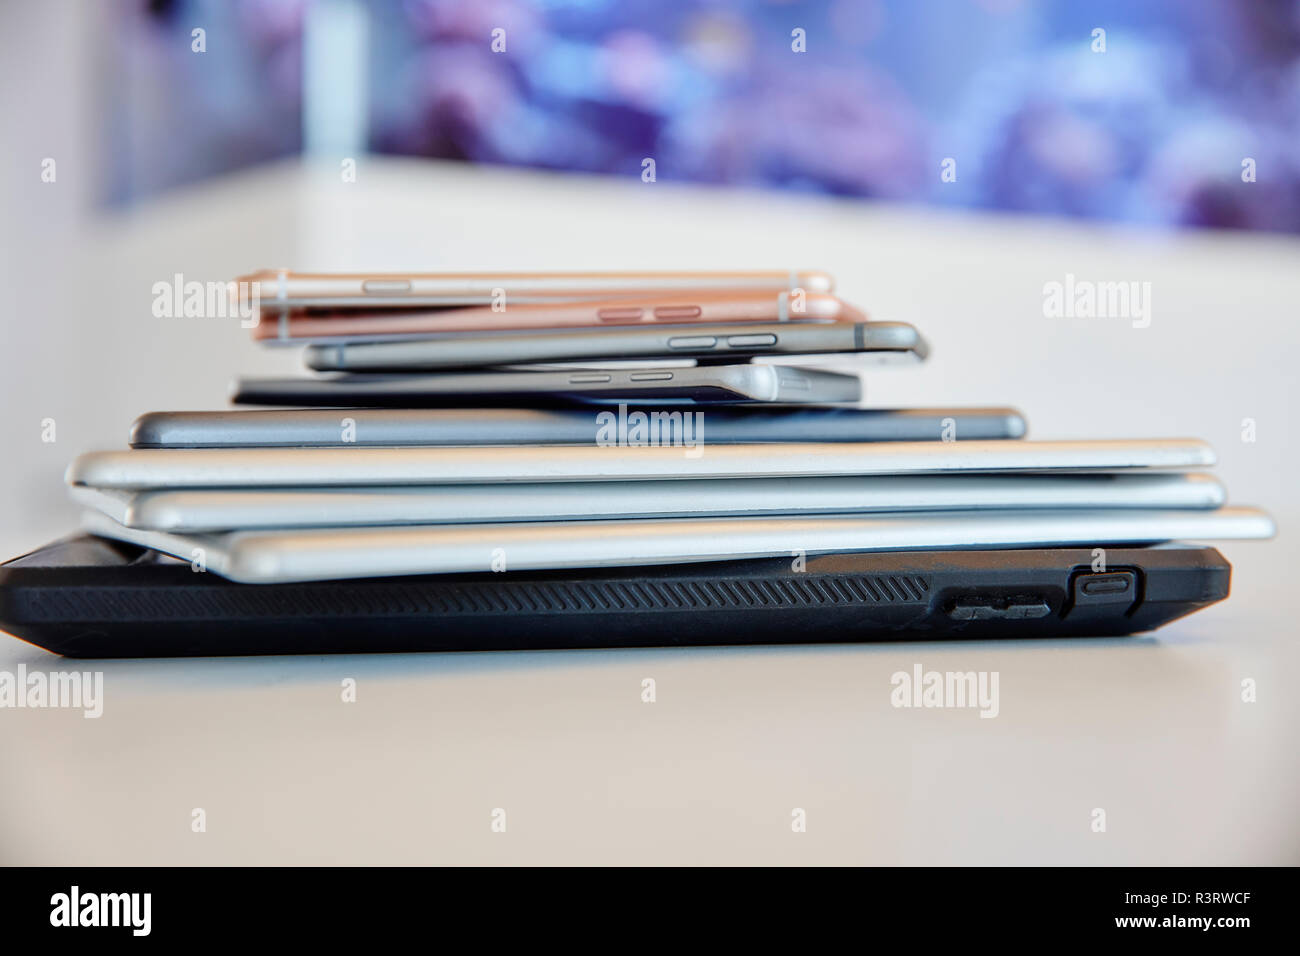 Stack of mobile devices Stock Photo